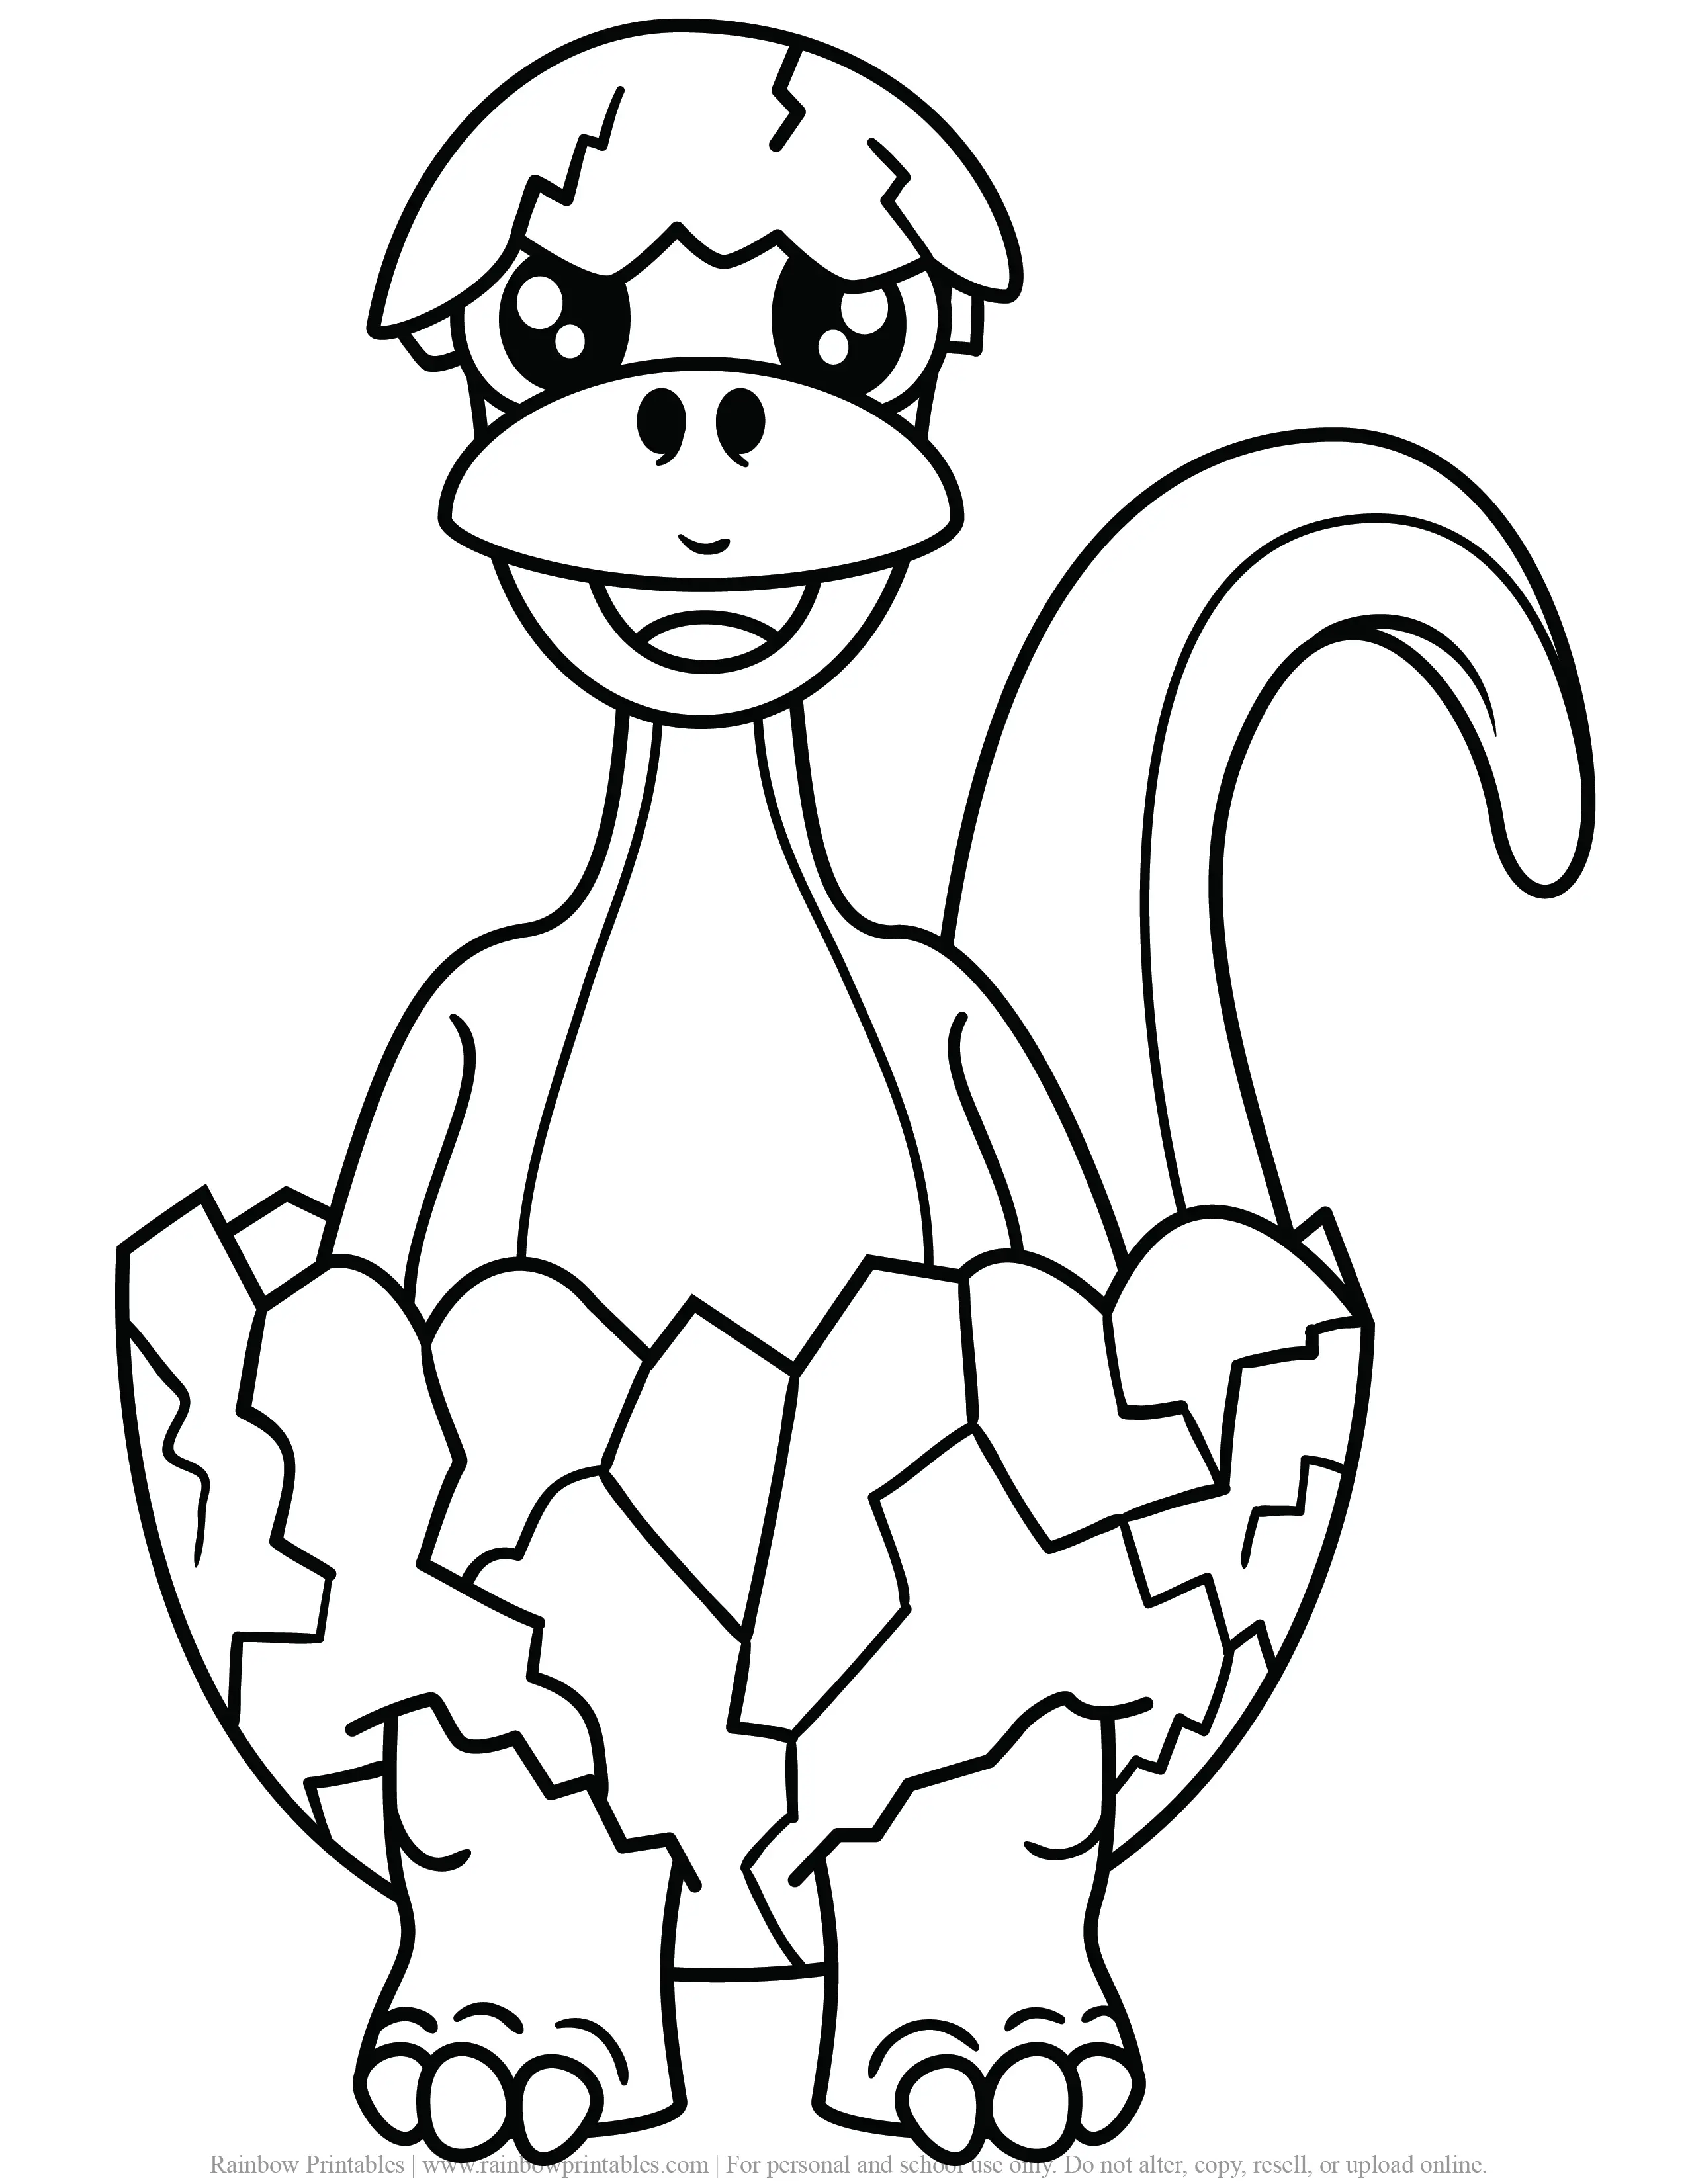 FREE DINOSAUR COLORING PAGES ACTIVITY FOR KIDS AND BOYS DINO DRAGON PRINTABLE-13